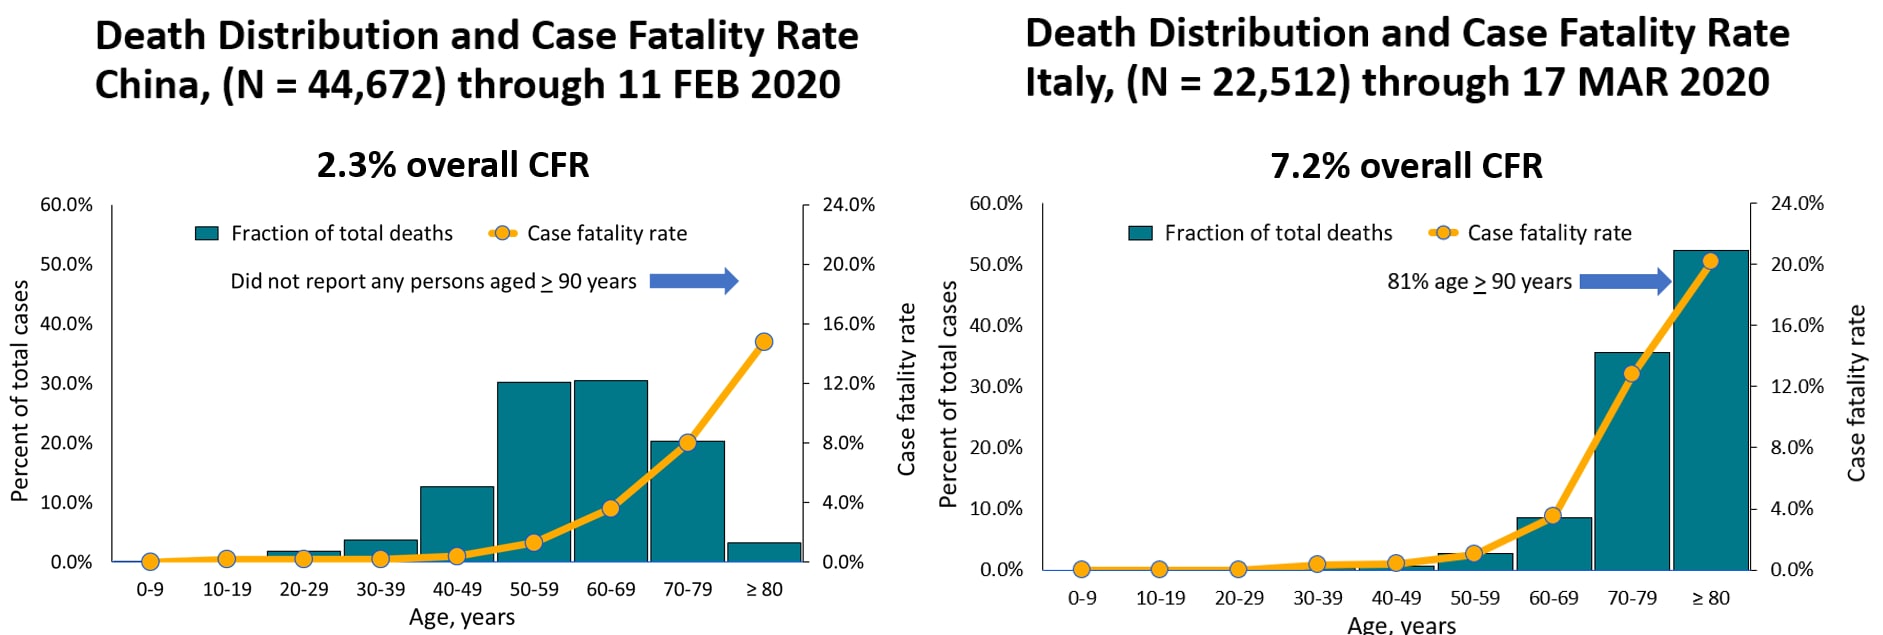 Death distribution and case fatality rate in China and Italy.